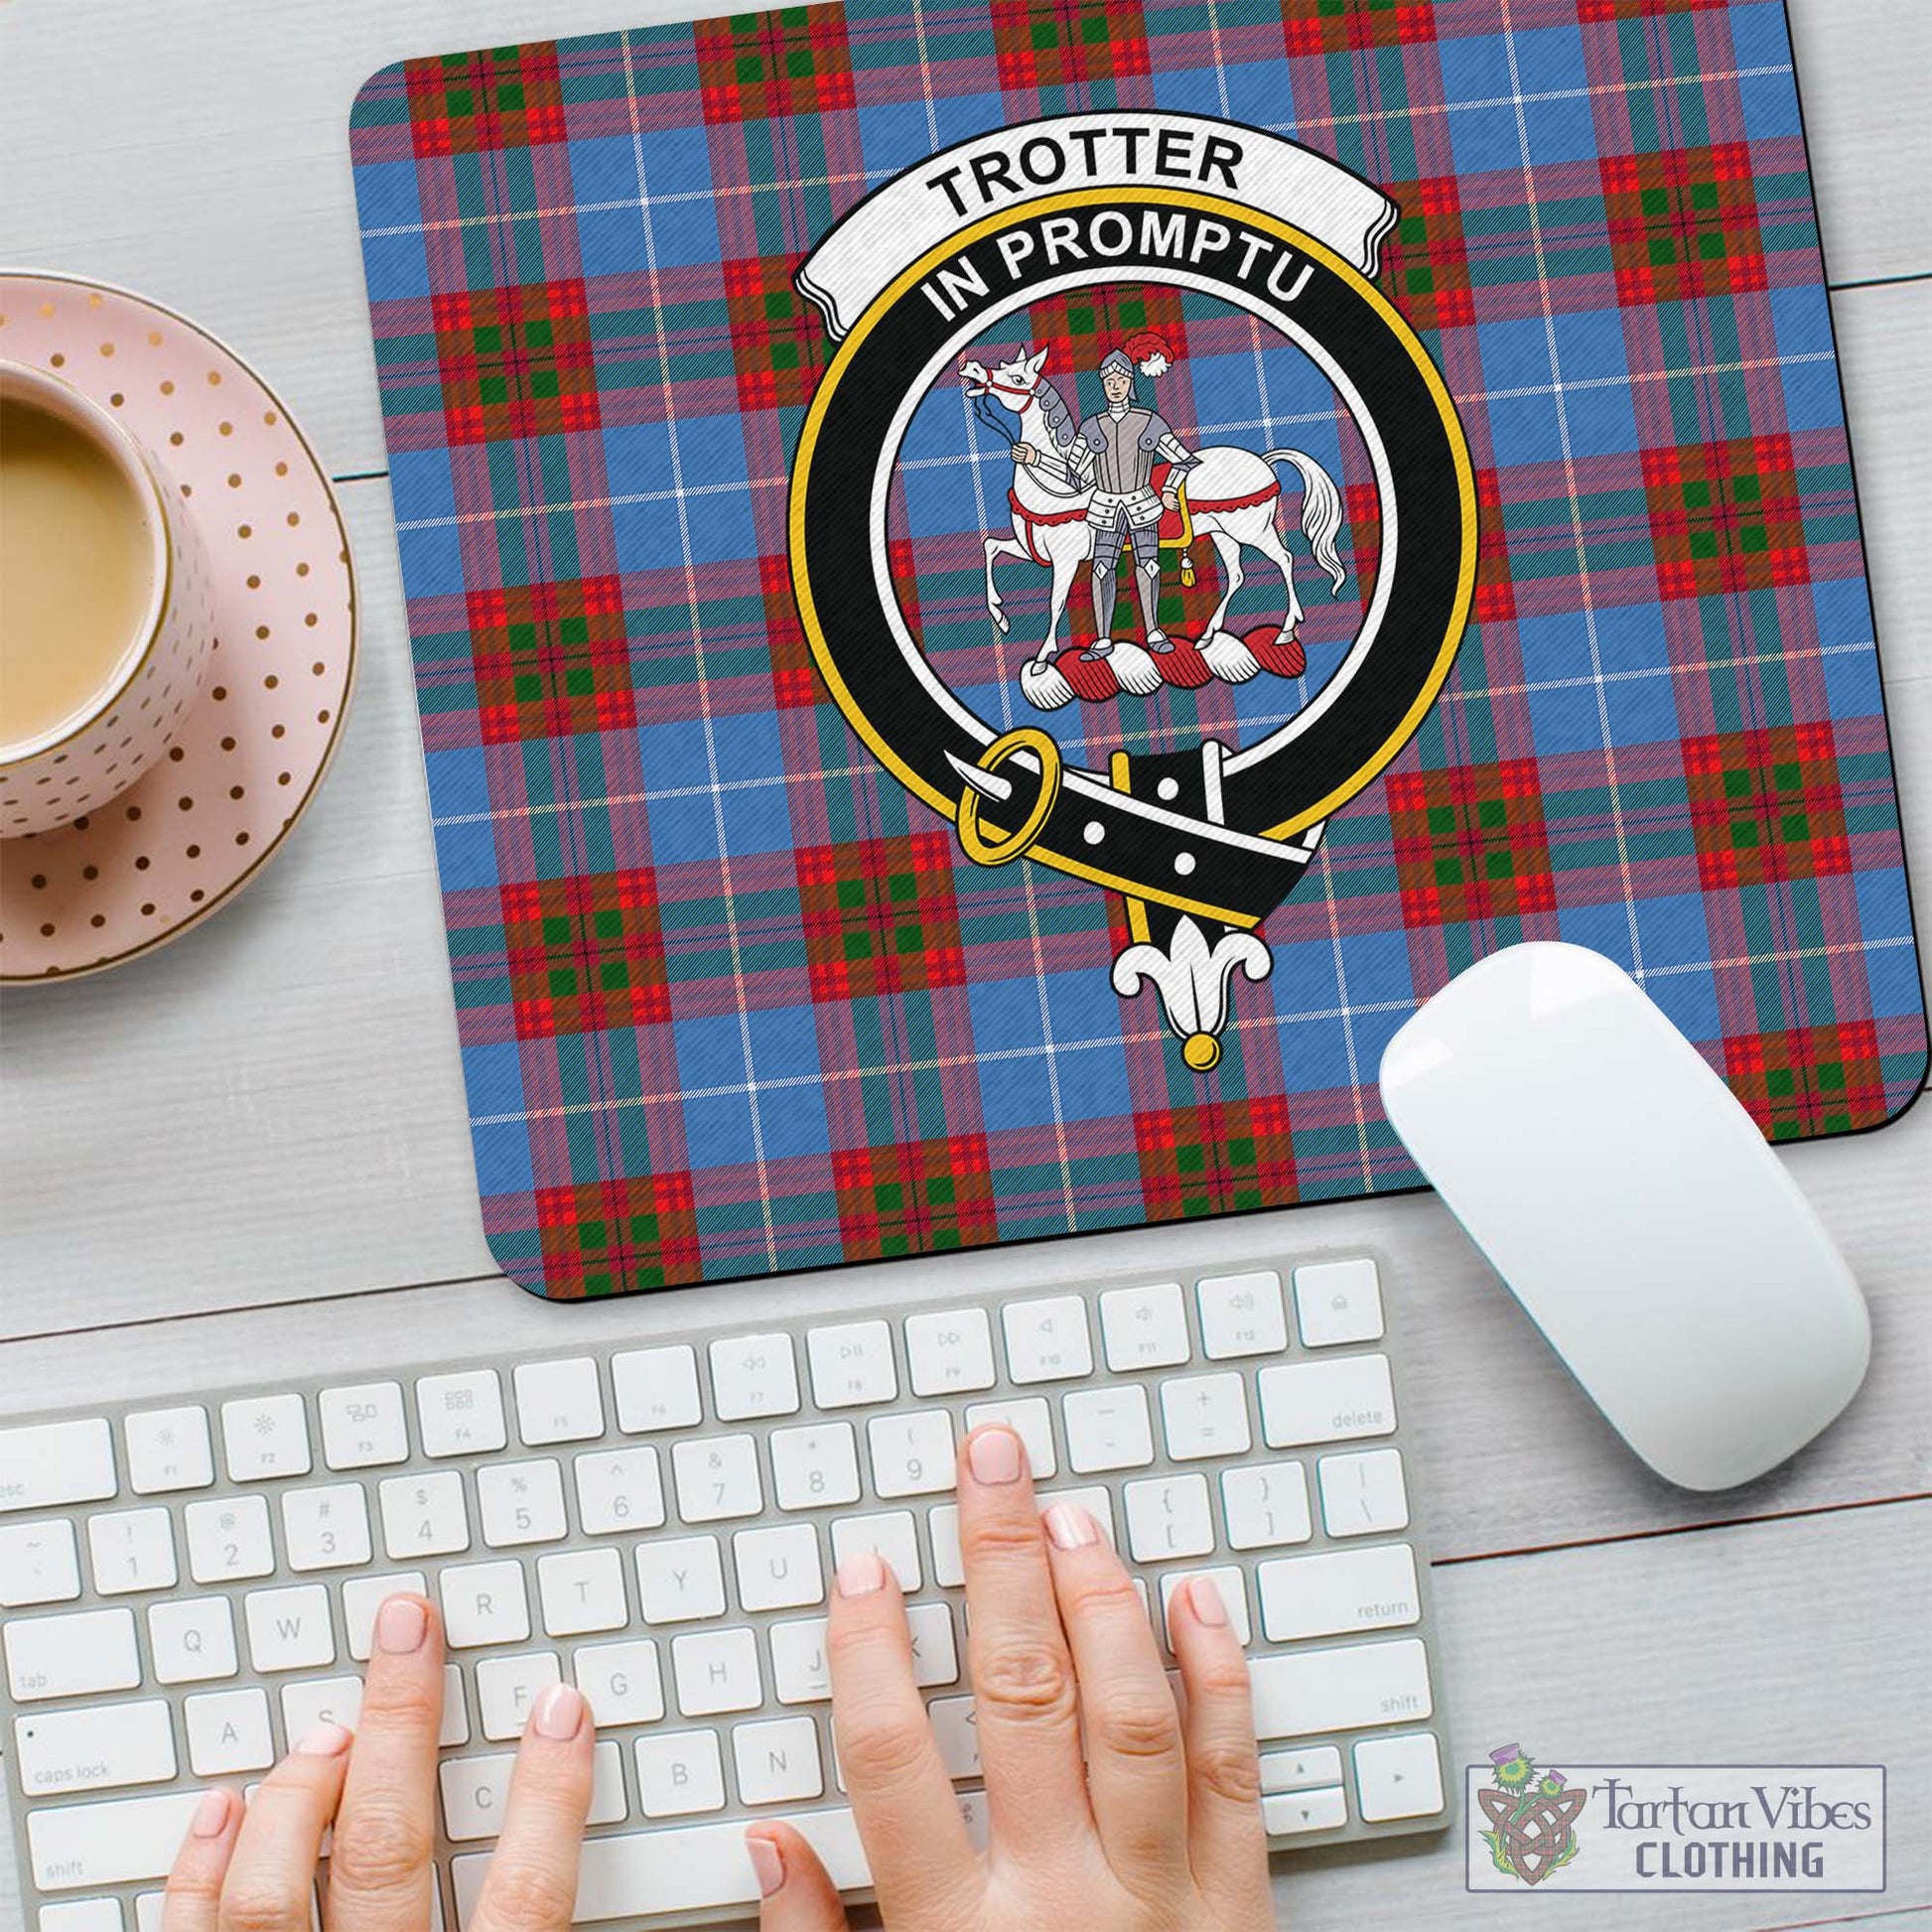 Tartan Vibes Clothing Trotter Tartan Mouse Pad with Family Crest